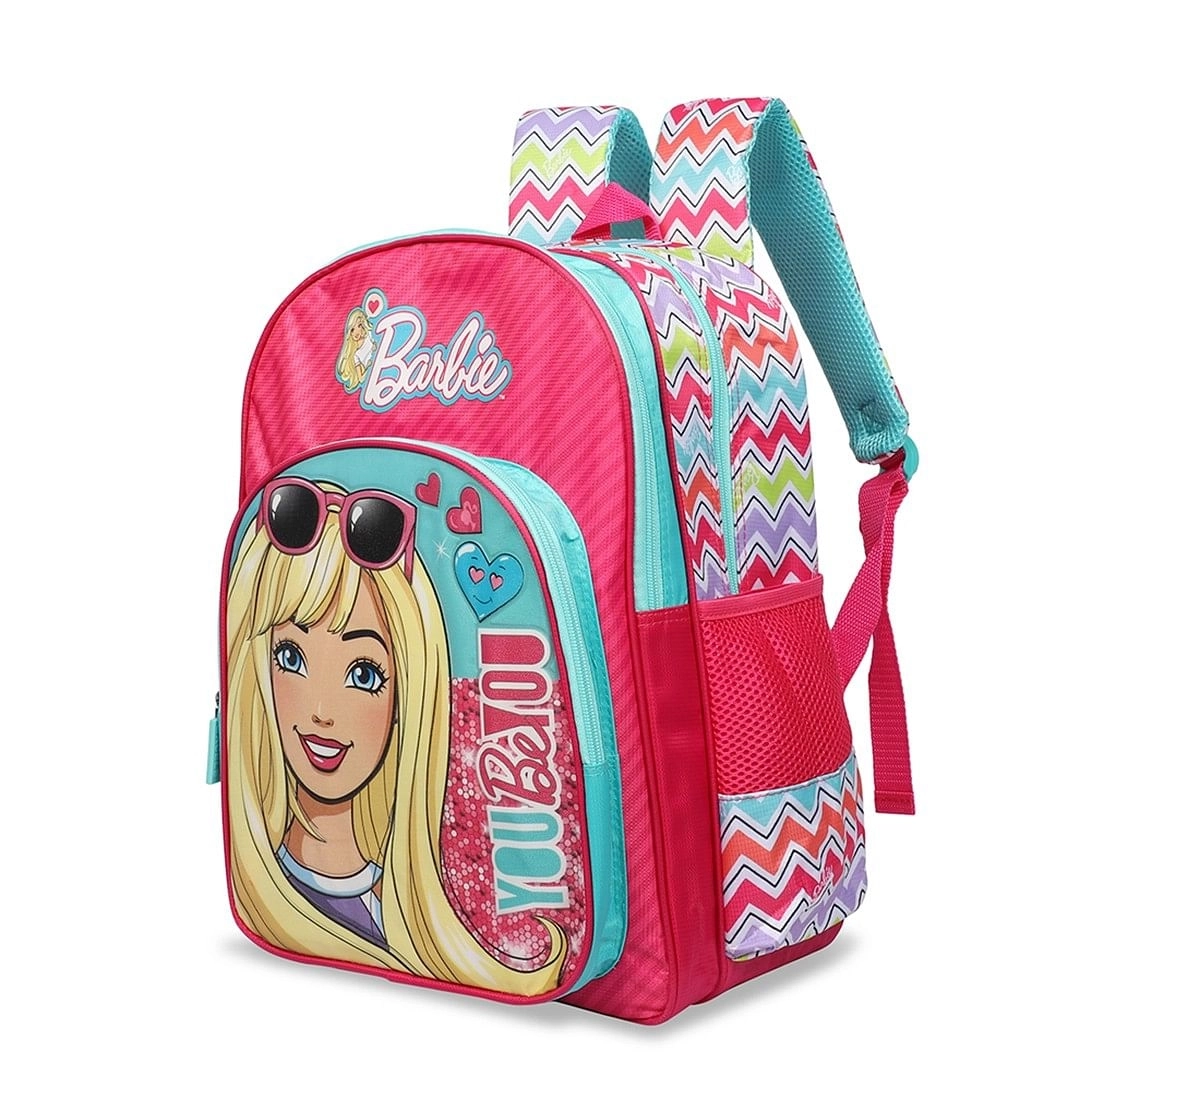 Barbie Barbie You Be You School Bag 41 Cm Bags for age 7Y+ (Pink)